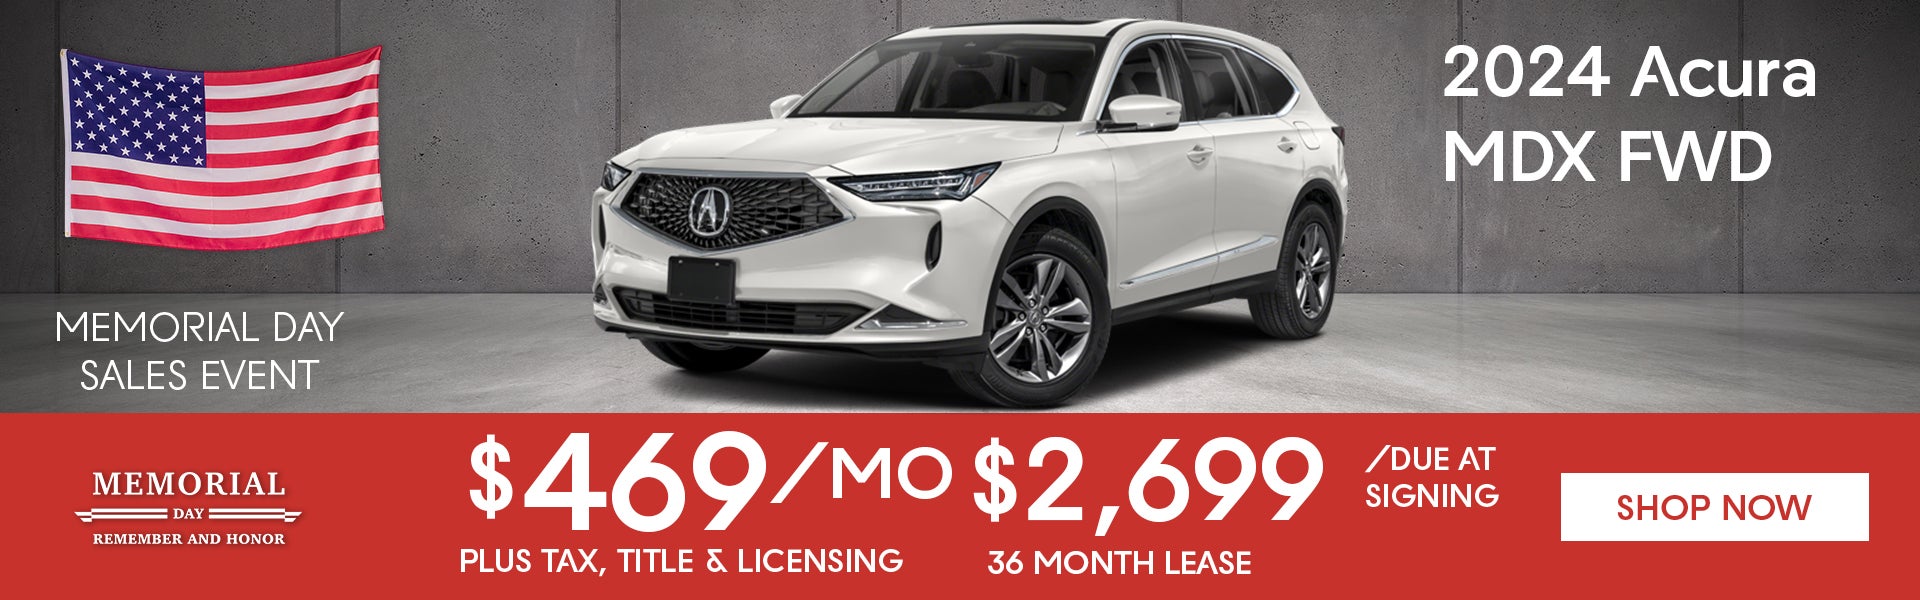 MDX lease